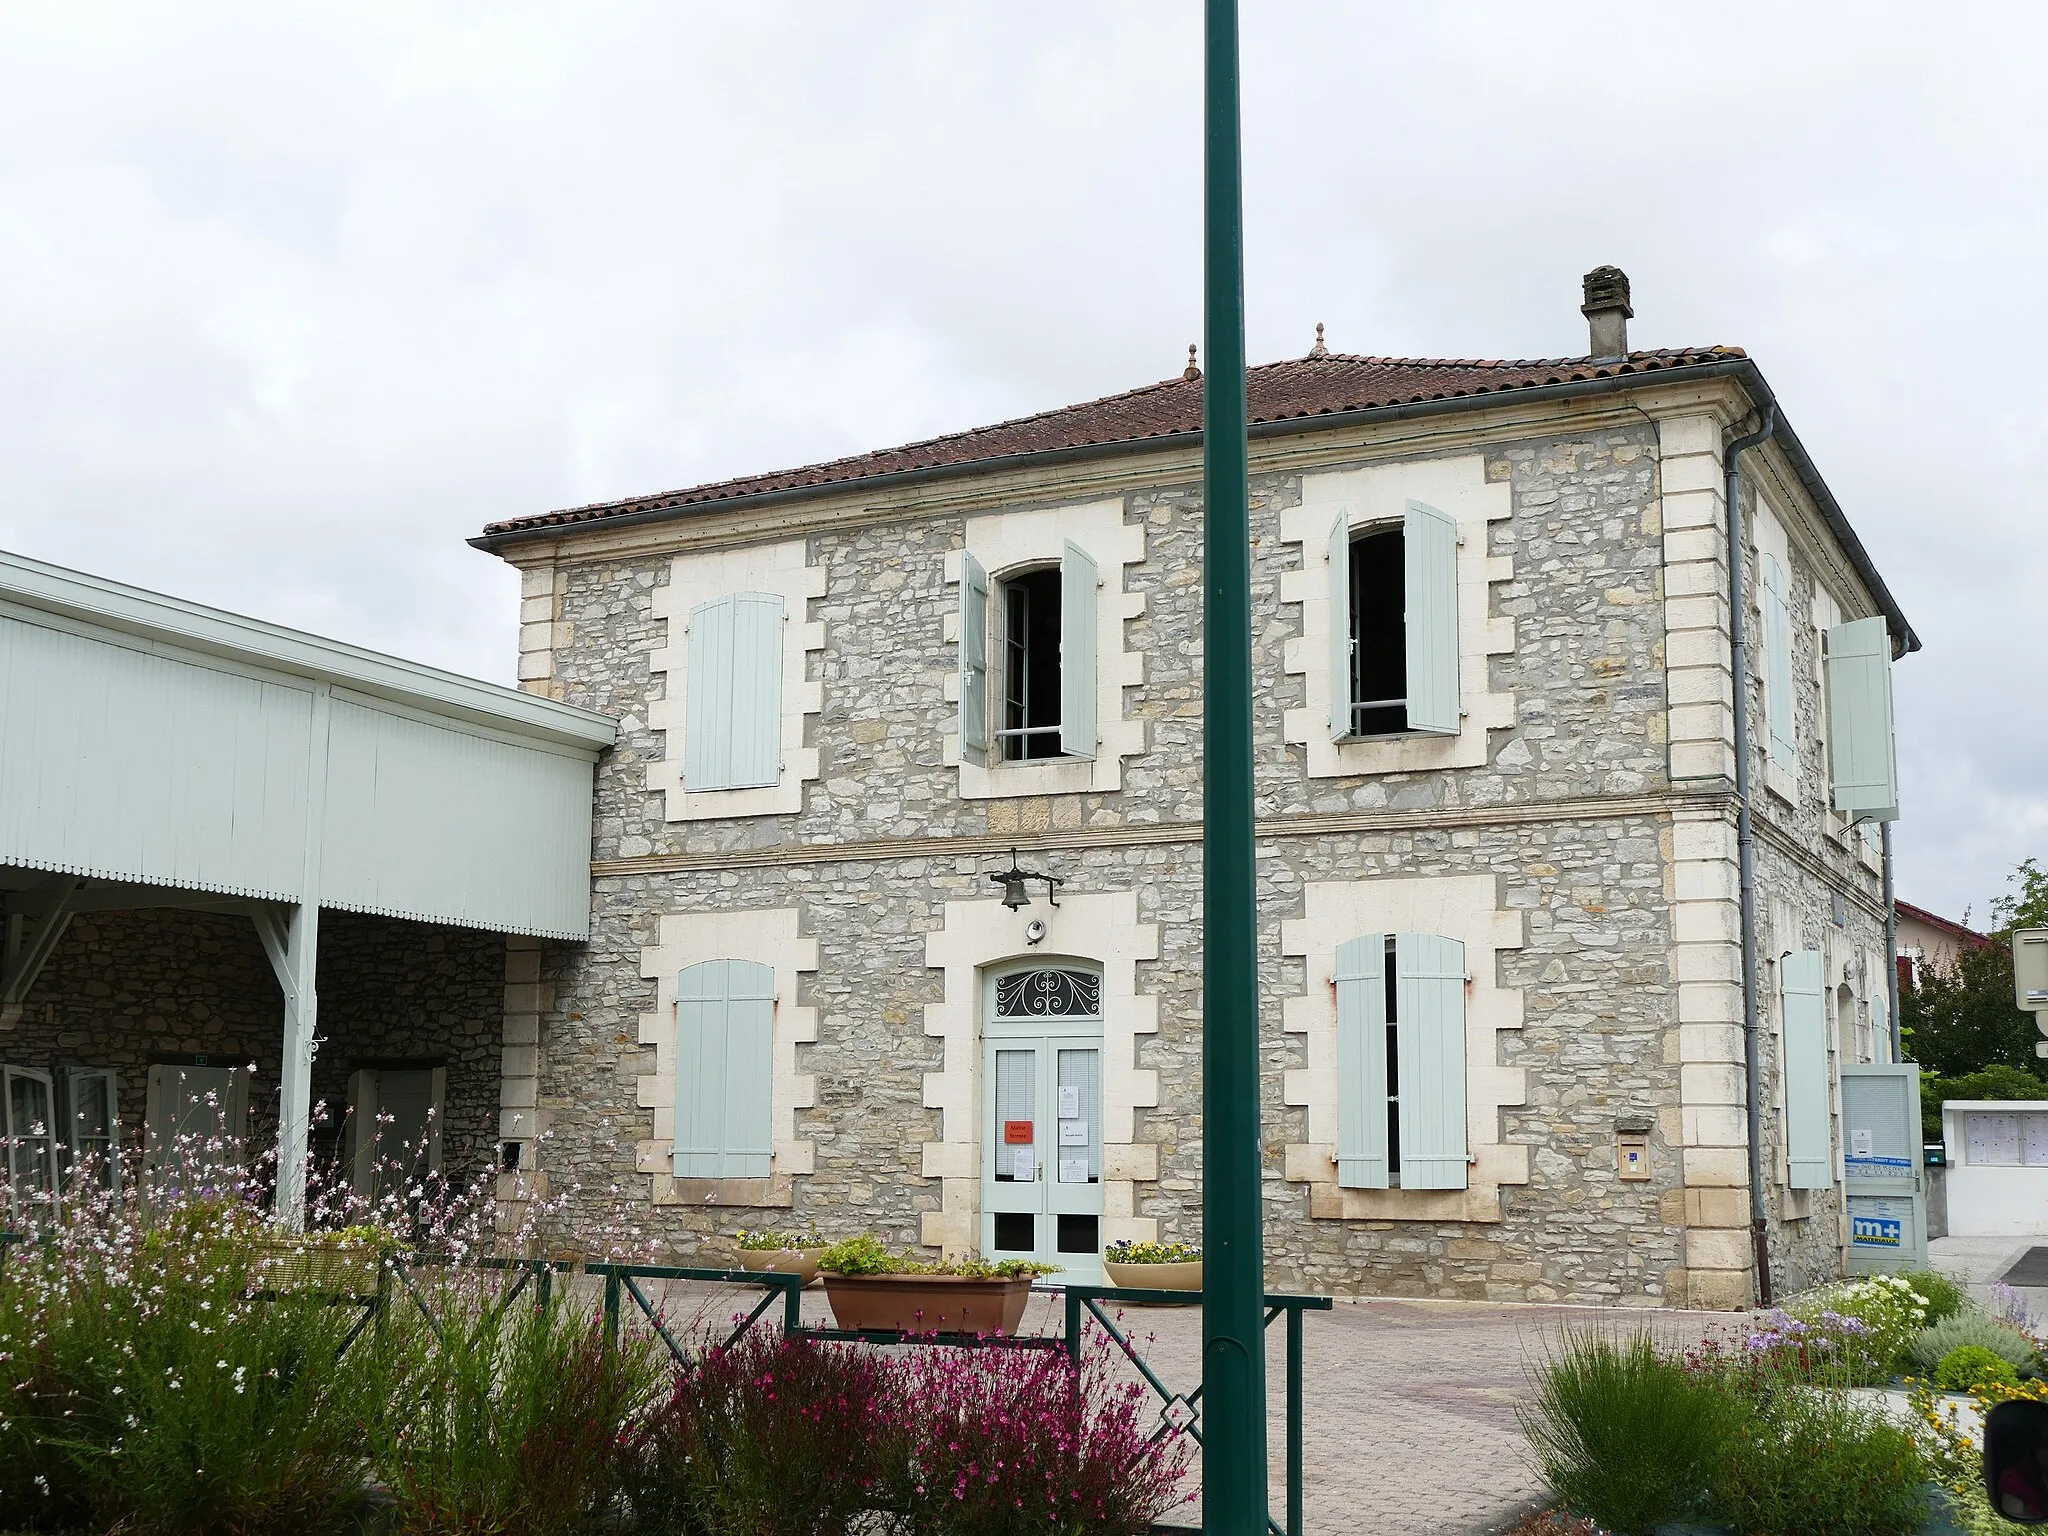 Photo showing: The city hall in Téthieu (Landes, Aquitaine, France).